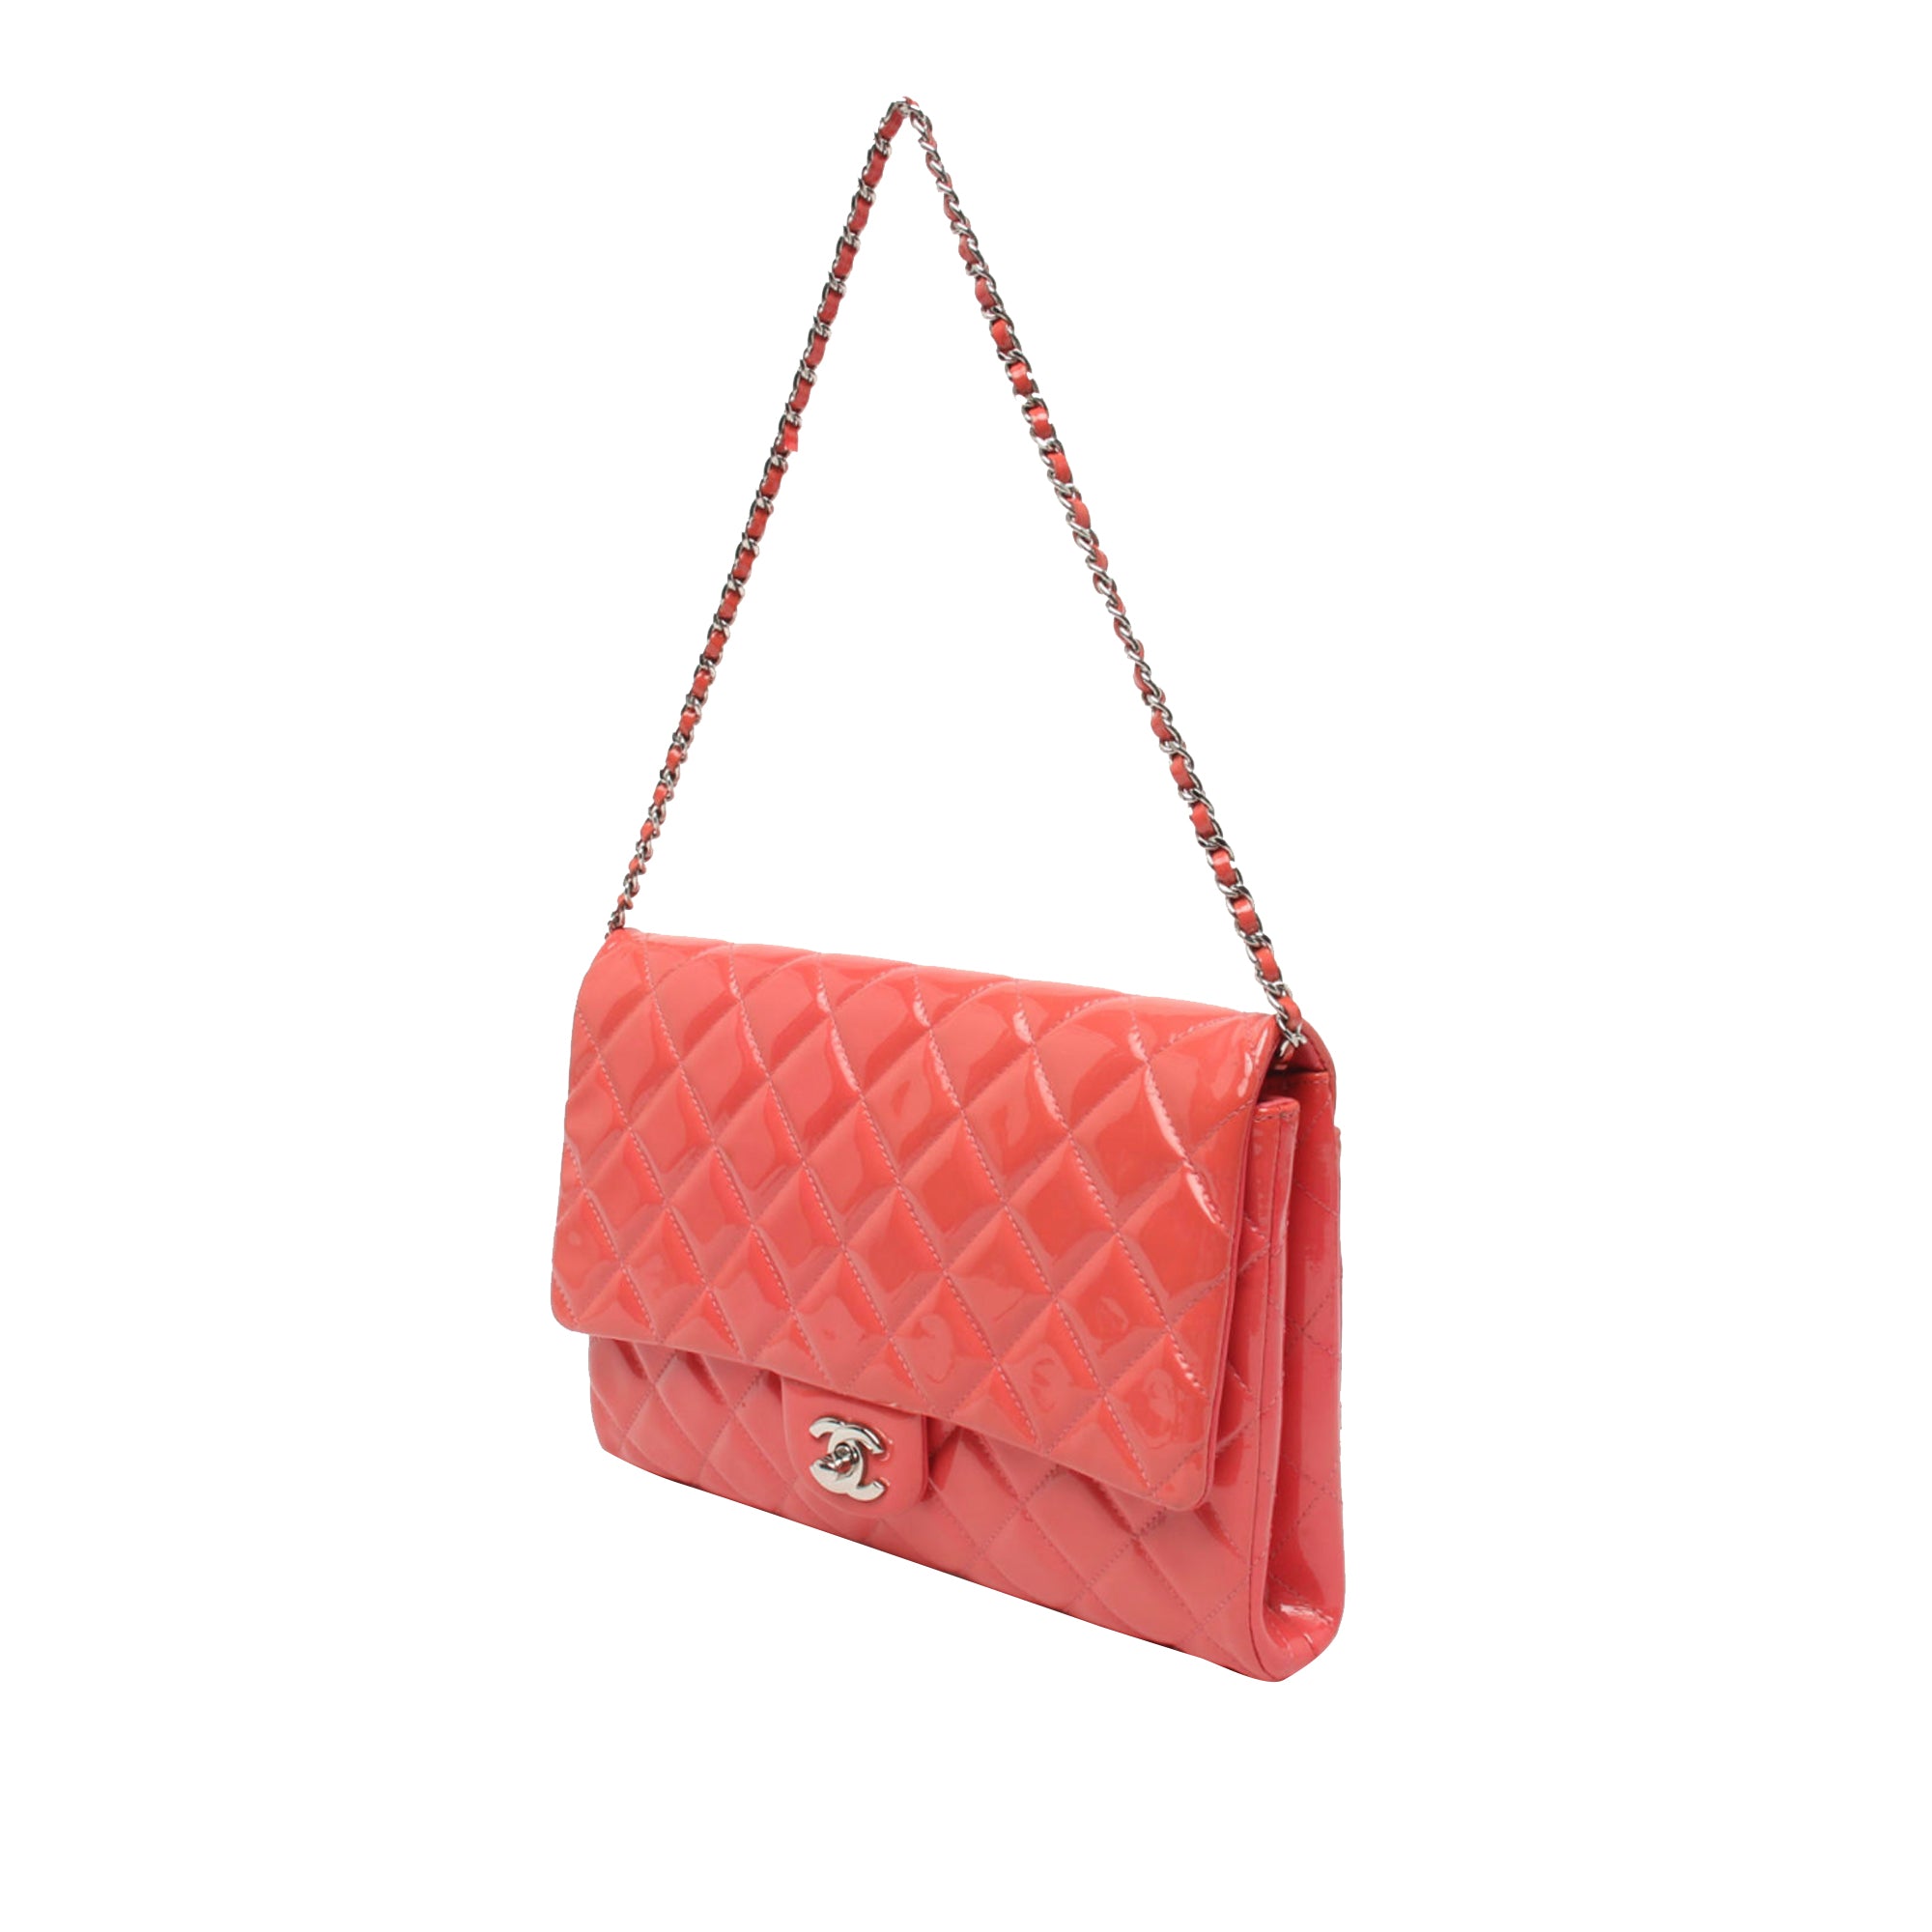 CHANEL Chanel Patent Leather Flap Bag Coral - Vault 55